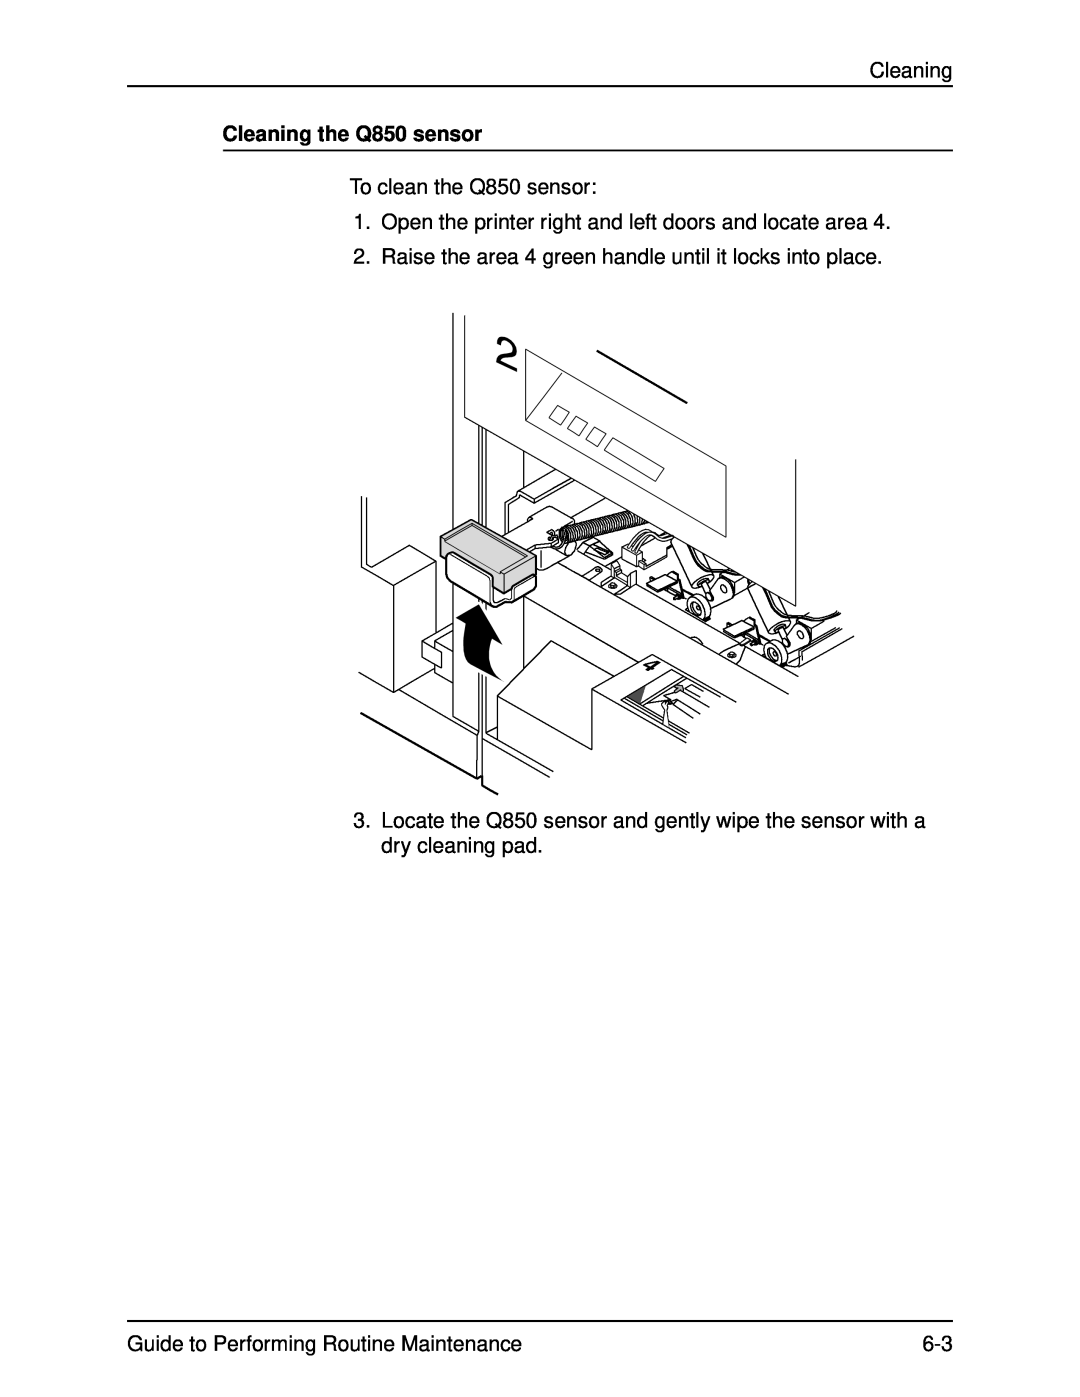 Xerox DocuPrint 96 manual Cleaning the Q850 sensor, To clean the Q850 sensor, Guide to Performing Routine Maintenance 